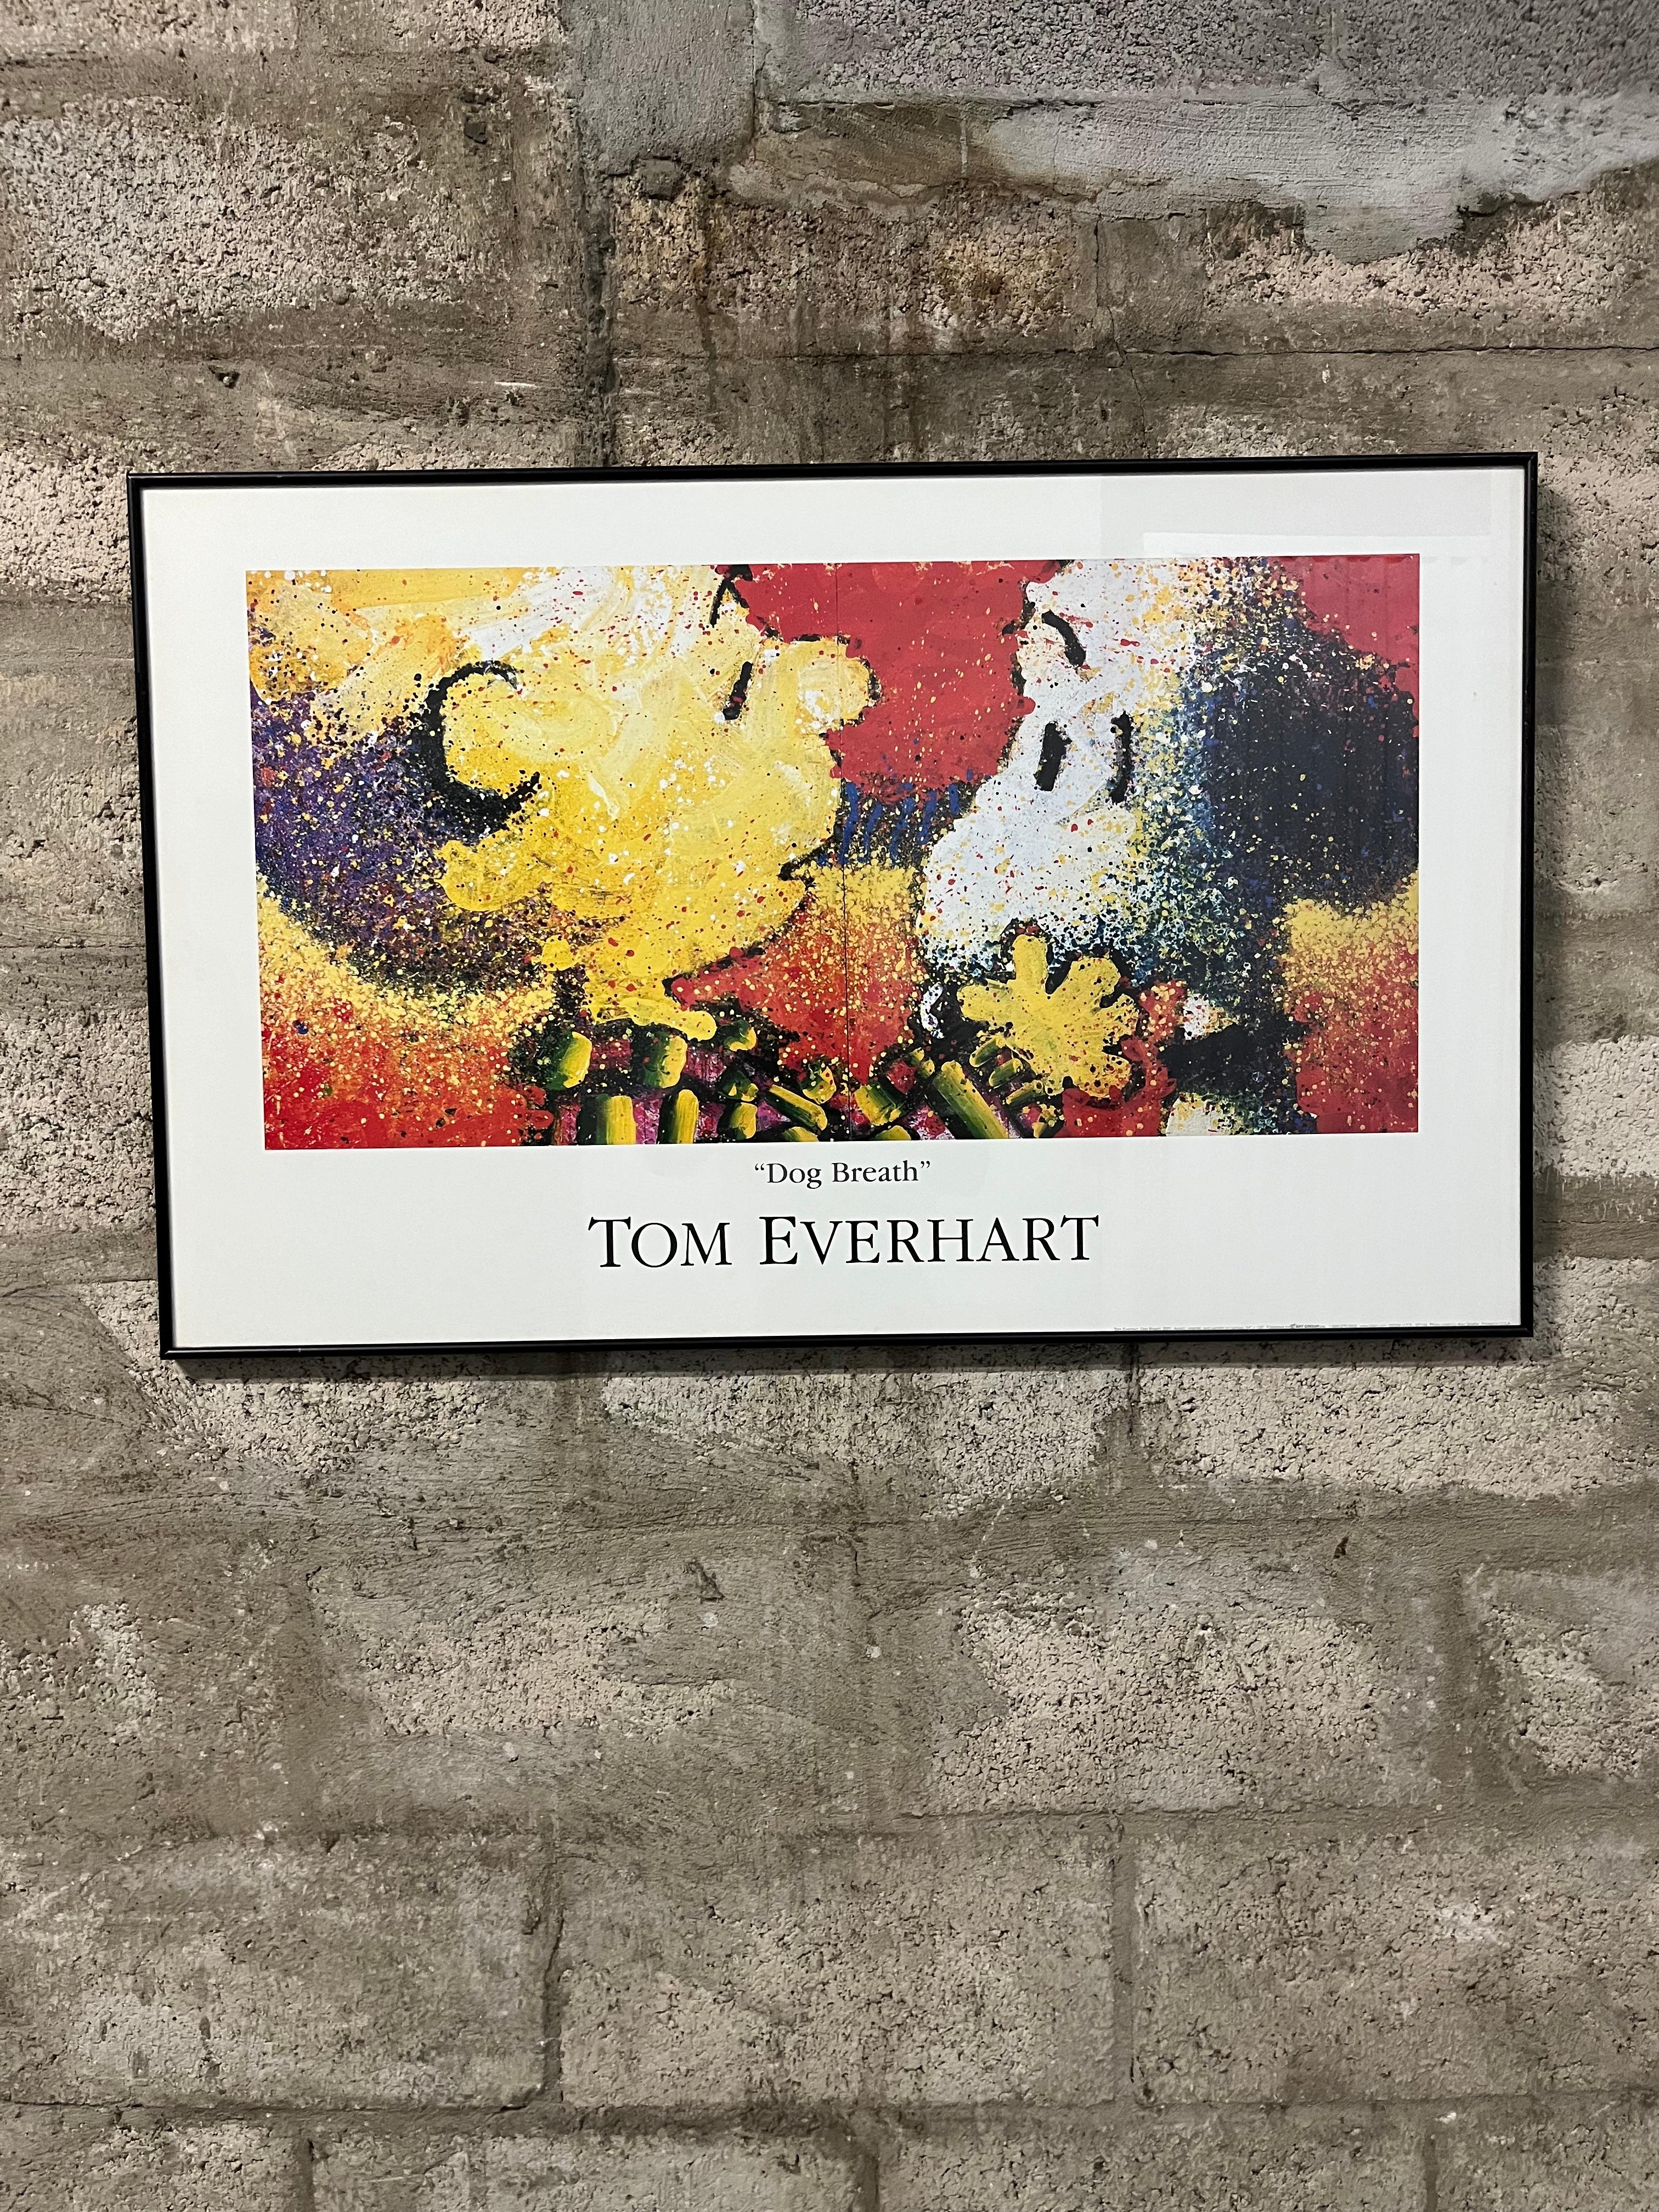 Early 21st Century Dog Breath by Tom Everhaet Custom Frame Poster published by the S 2 Art Group. Year 2002
Features a pixelated image of Charlie Brown and Snoopy staring at each other, custom framed with a black brushed aluminum frame and protected